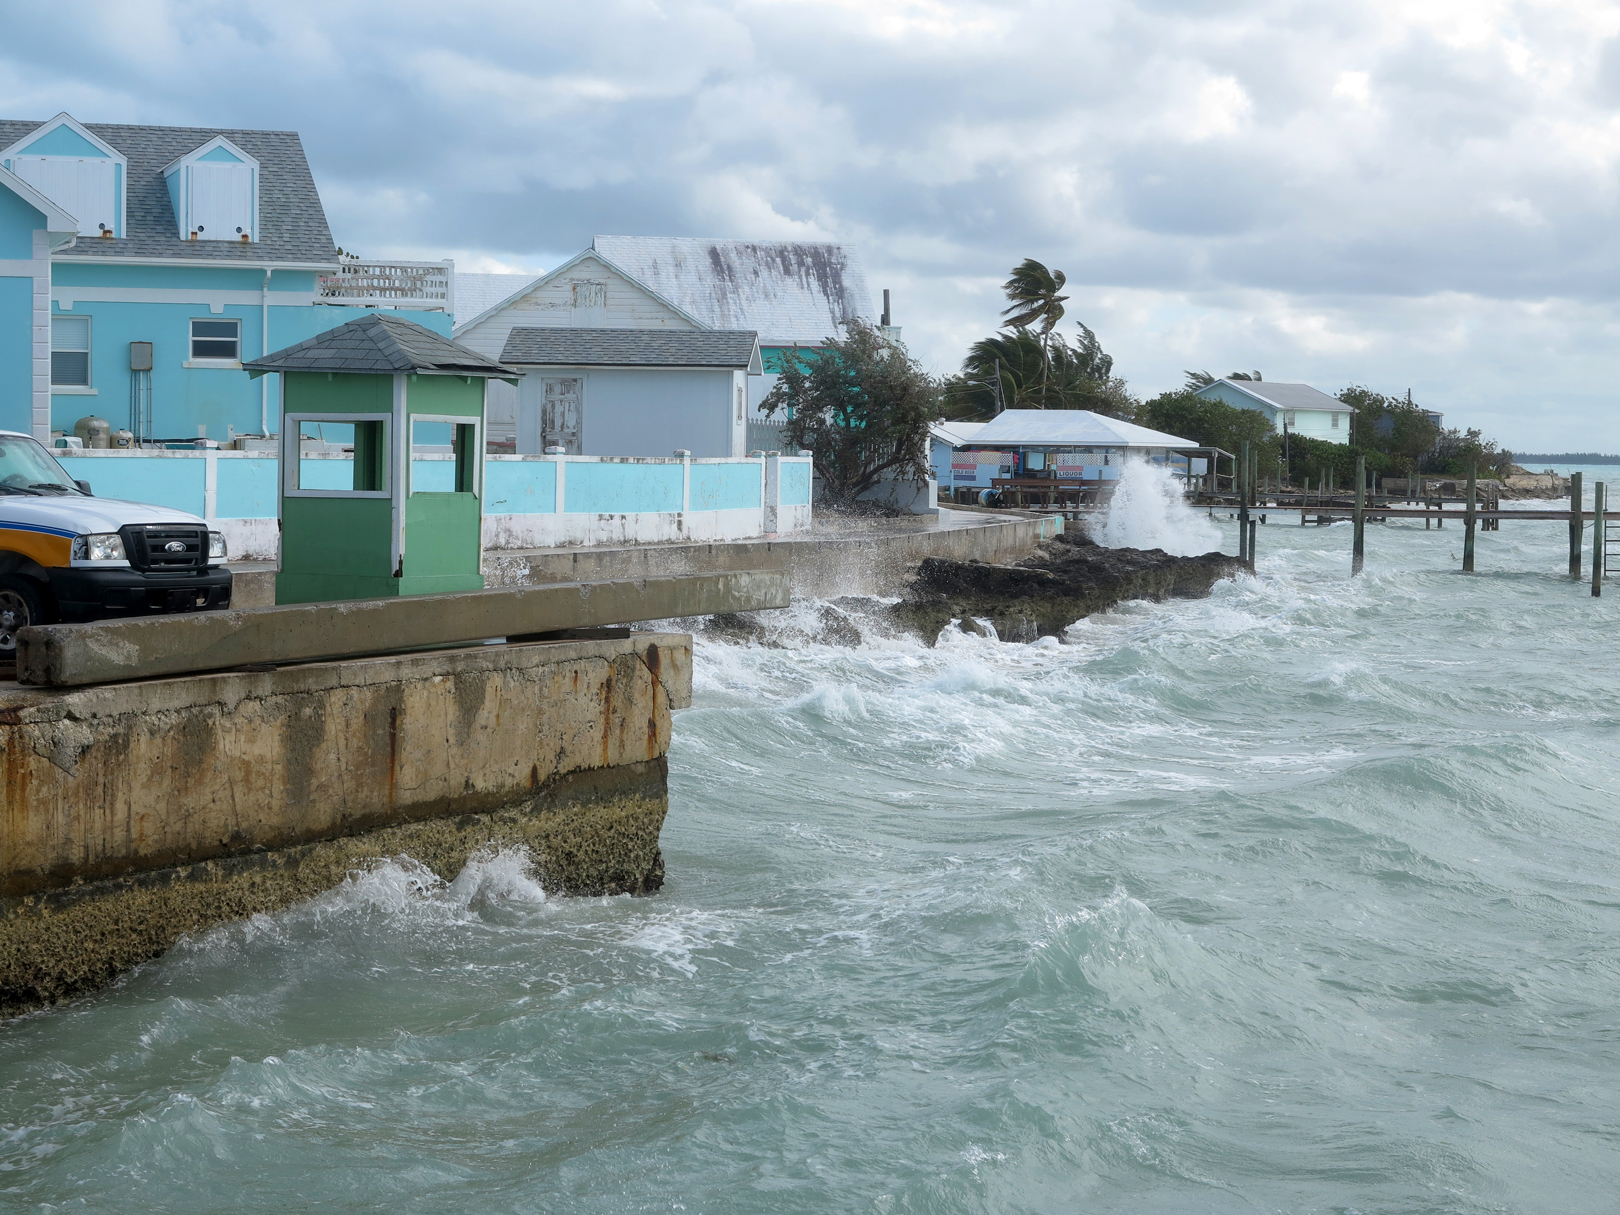 Windy day in Green Turtle Cay, Abaco, Bahamas